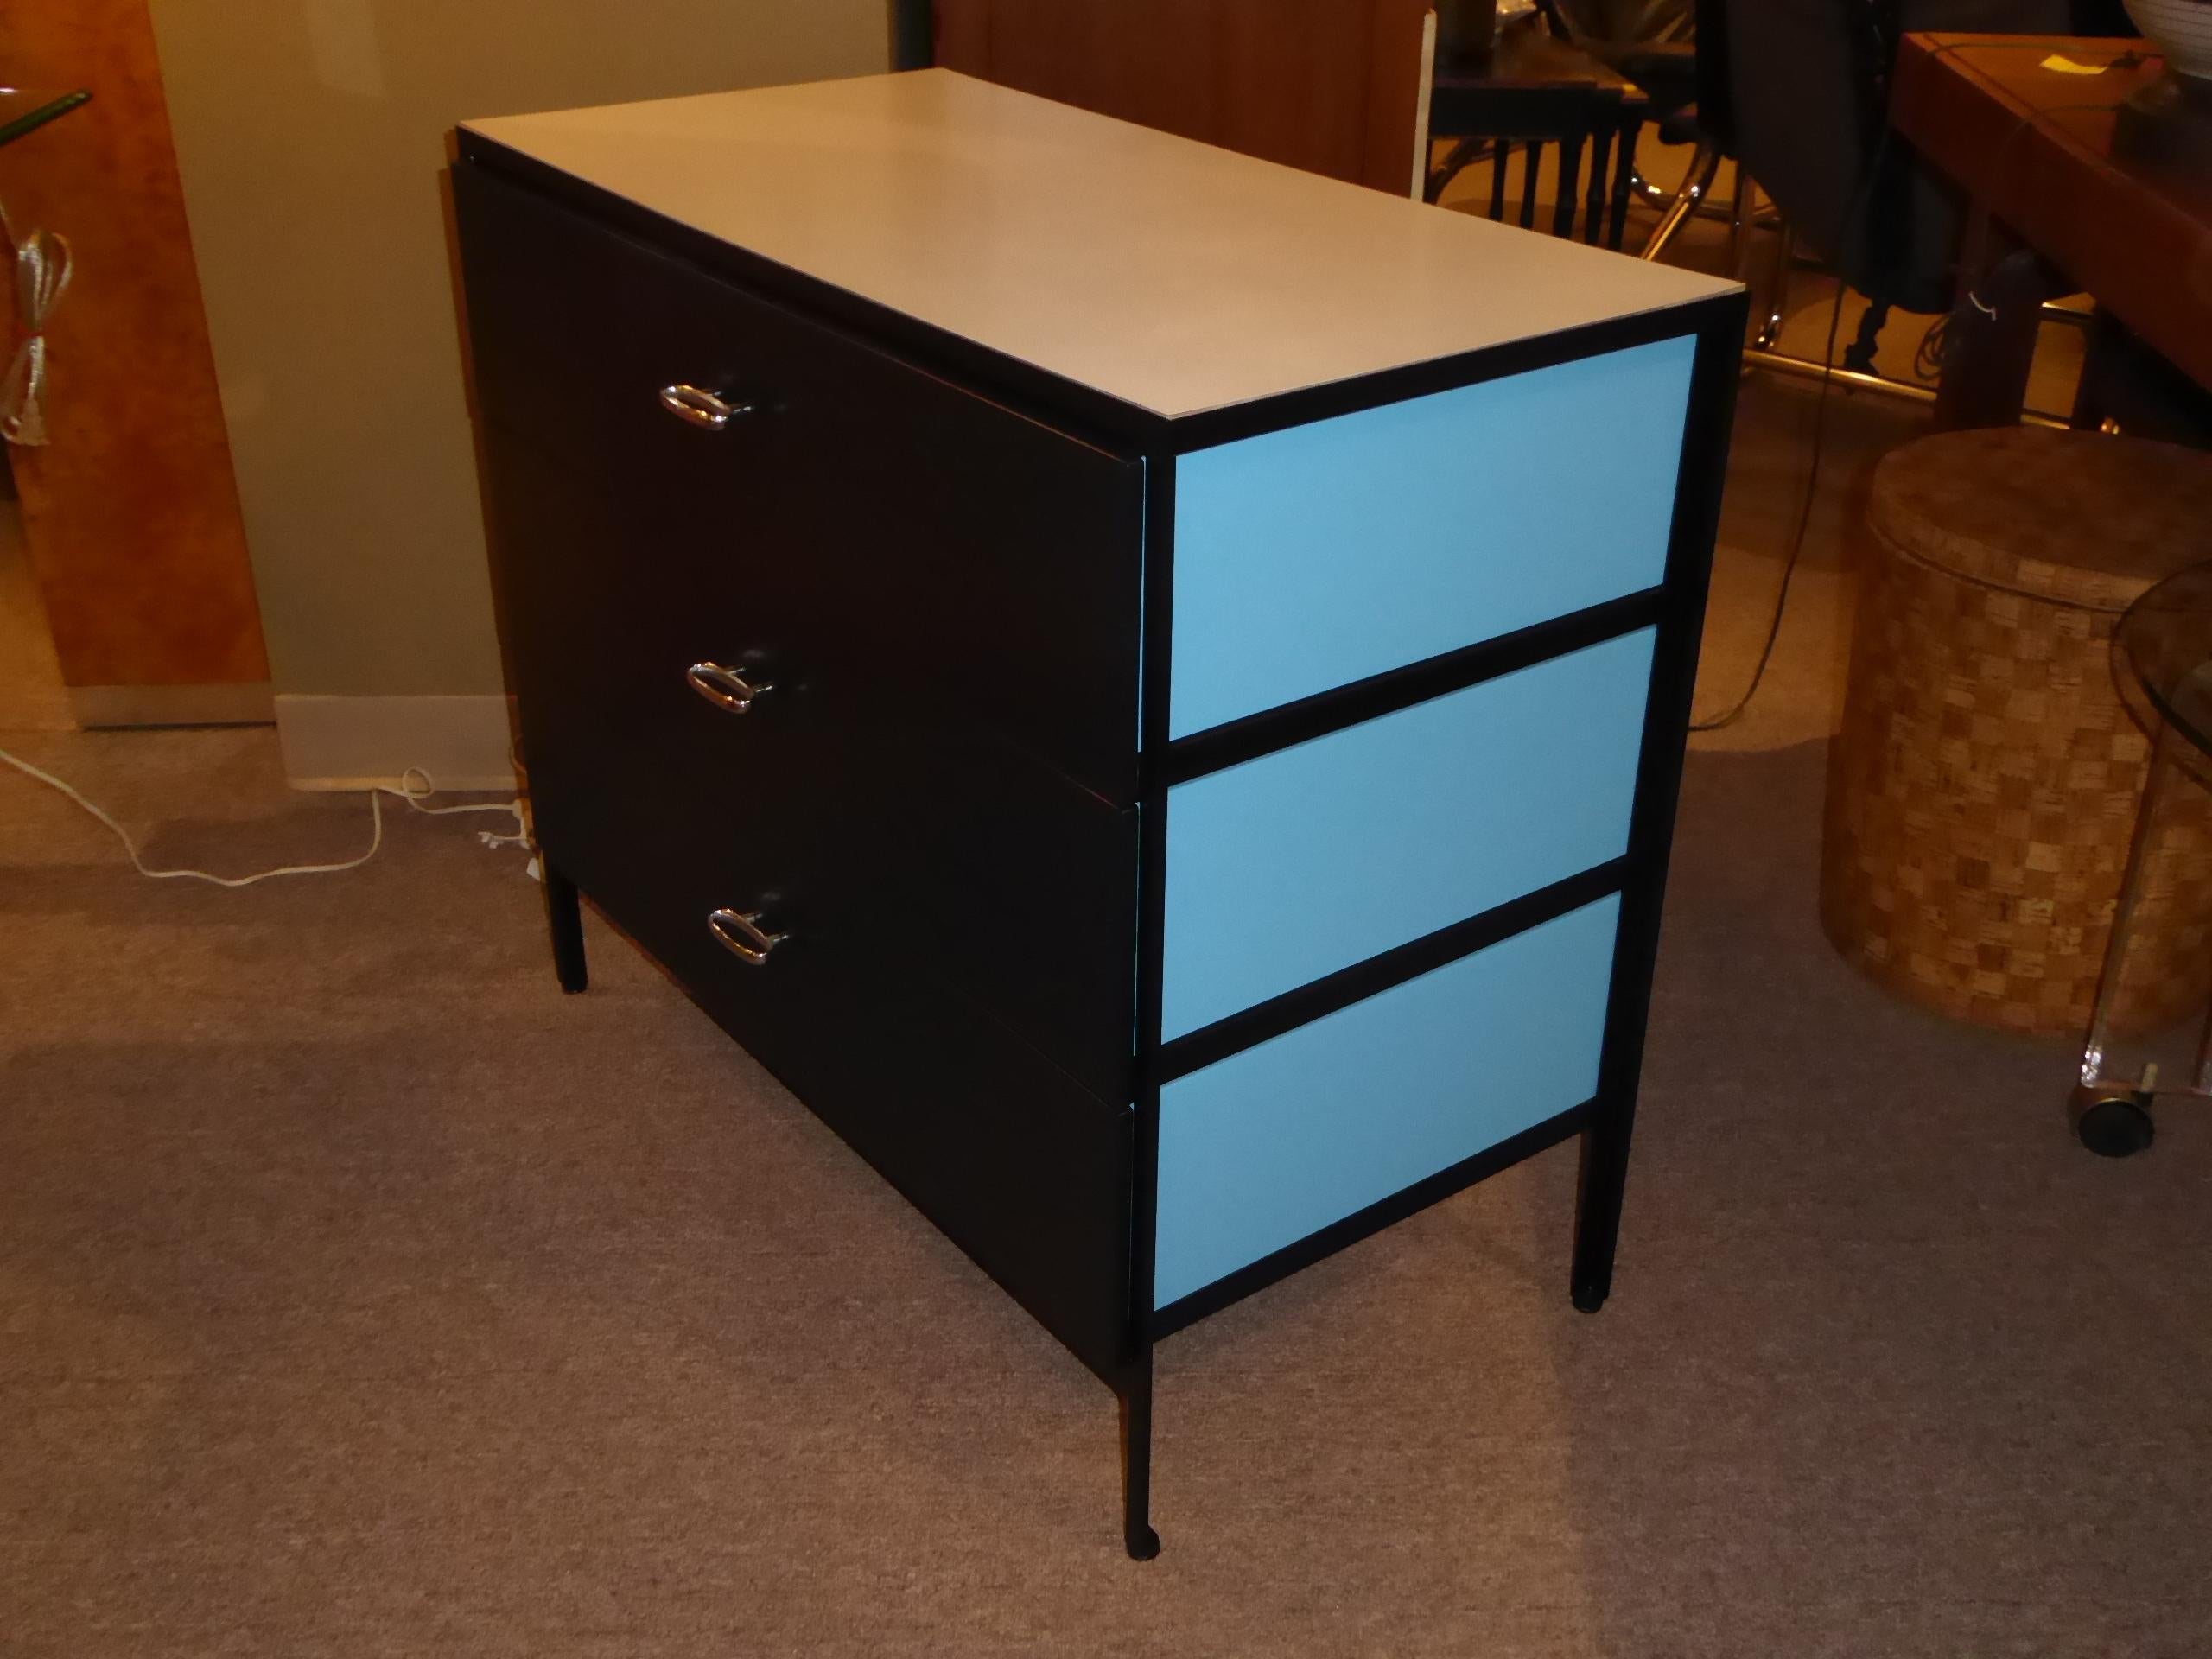 Quite nice steel frame dresser by George Nelson for Herman Miller consisting of a white mica top and three drawers with black painted fronts and Royal blue painted sides and back that show through the open blackened steel frame design. Each drawer